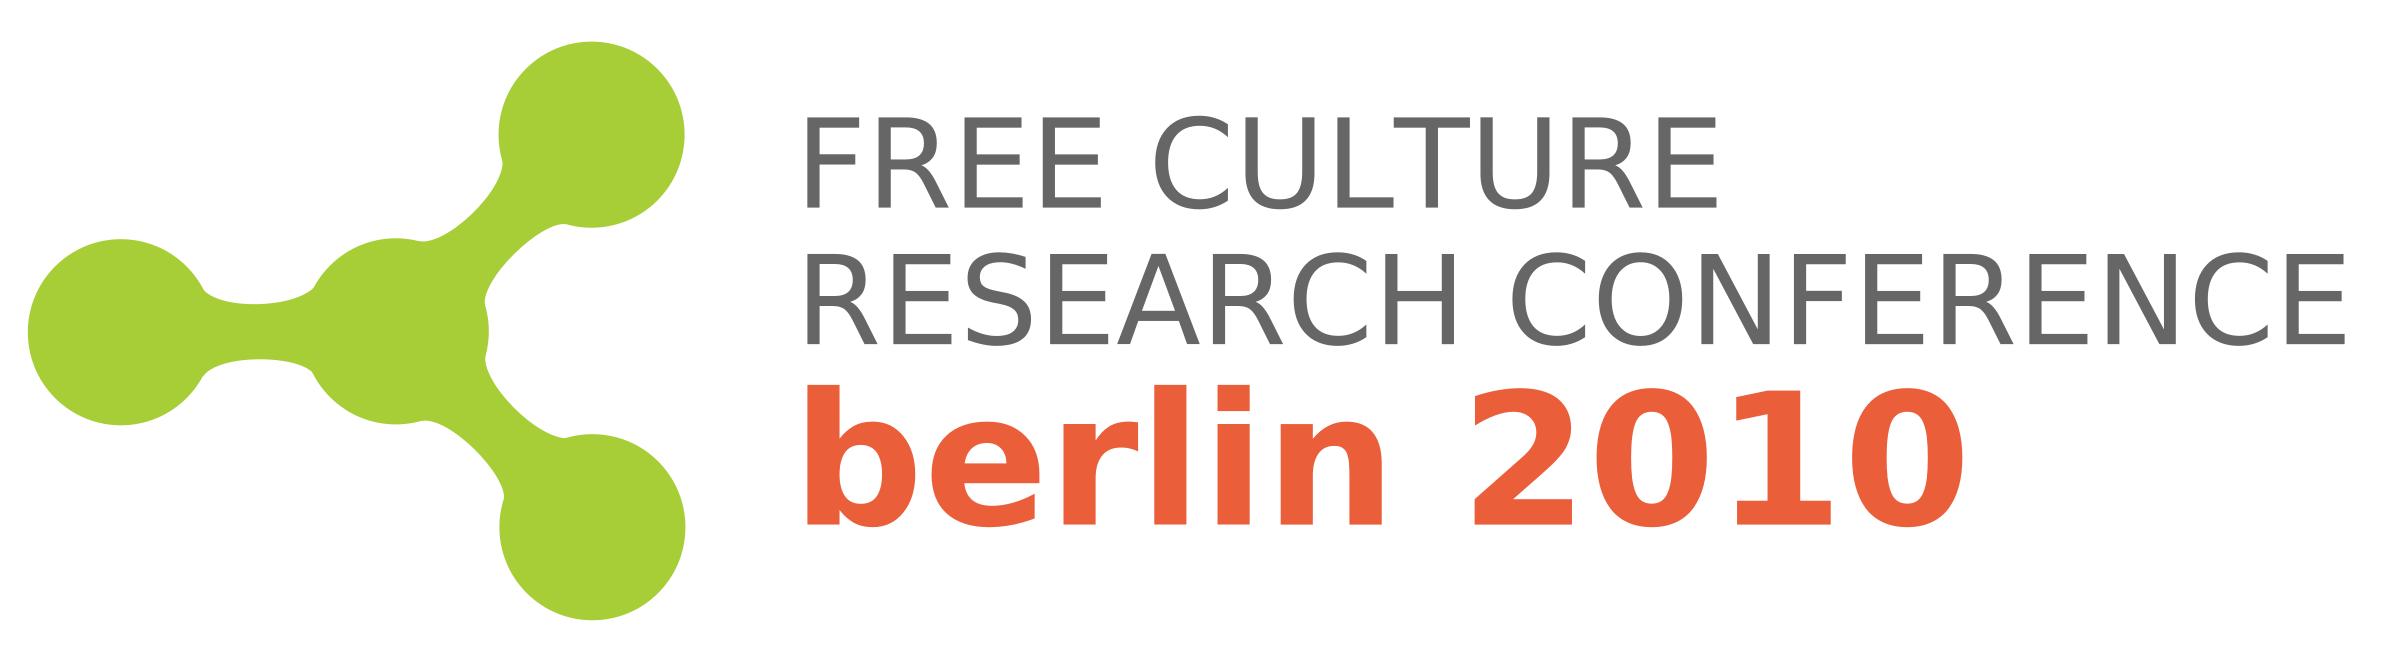 Free Culture Research Conference Logo 4 icons